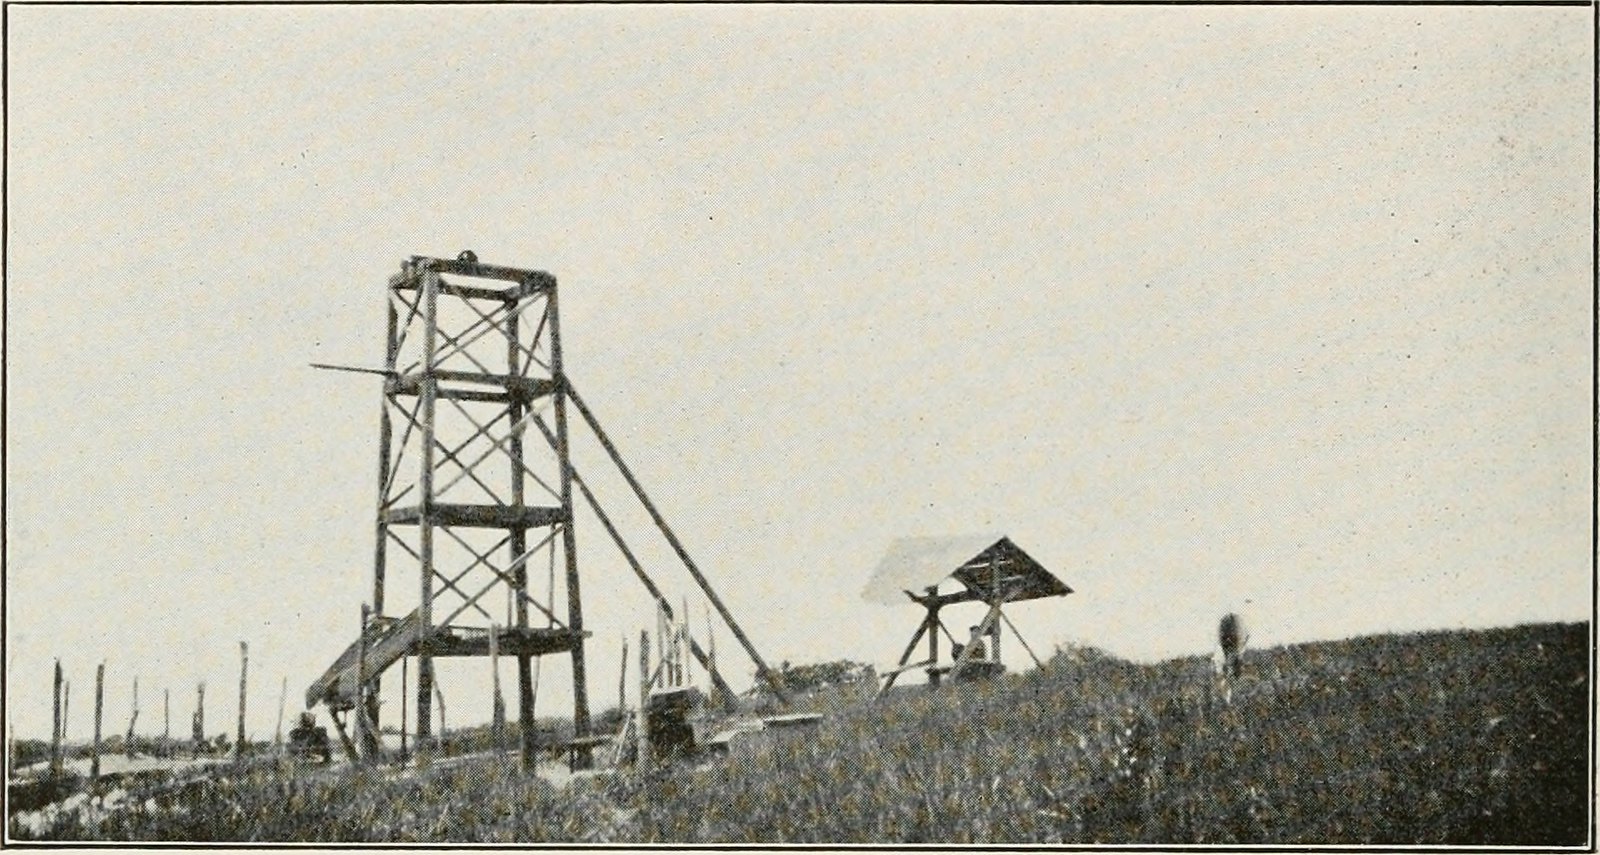 Image from page 513 of "The Cuba review" (1907-1931)